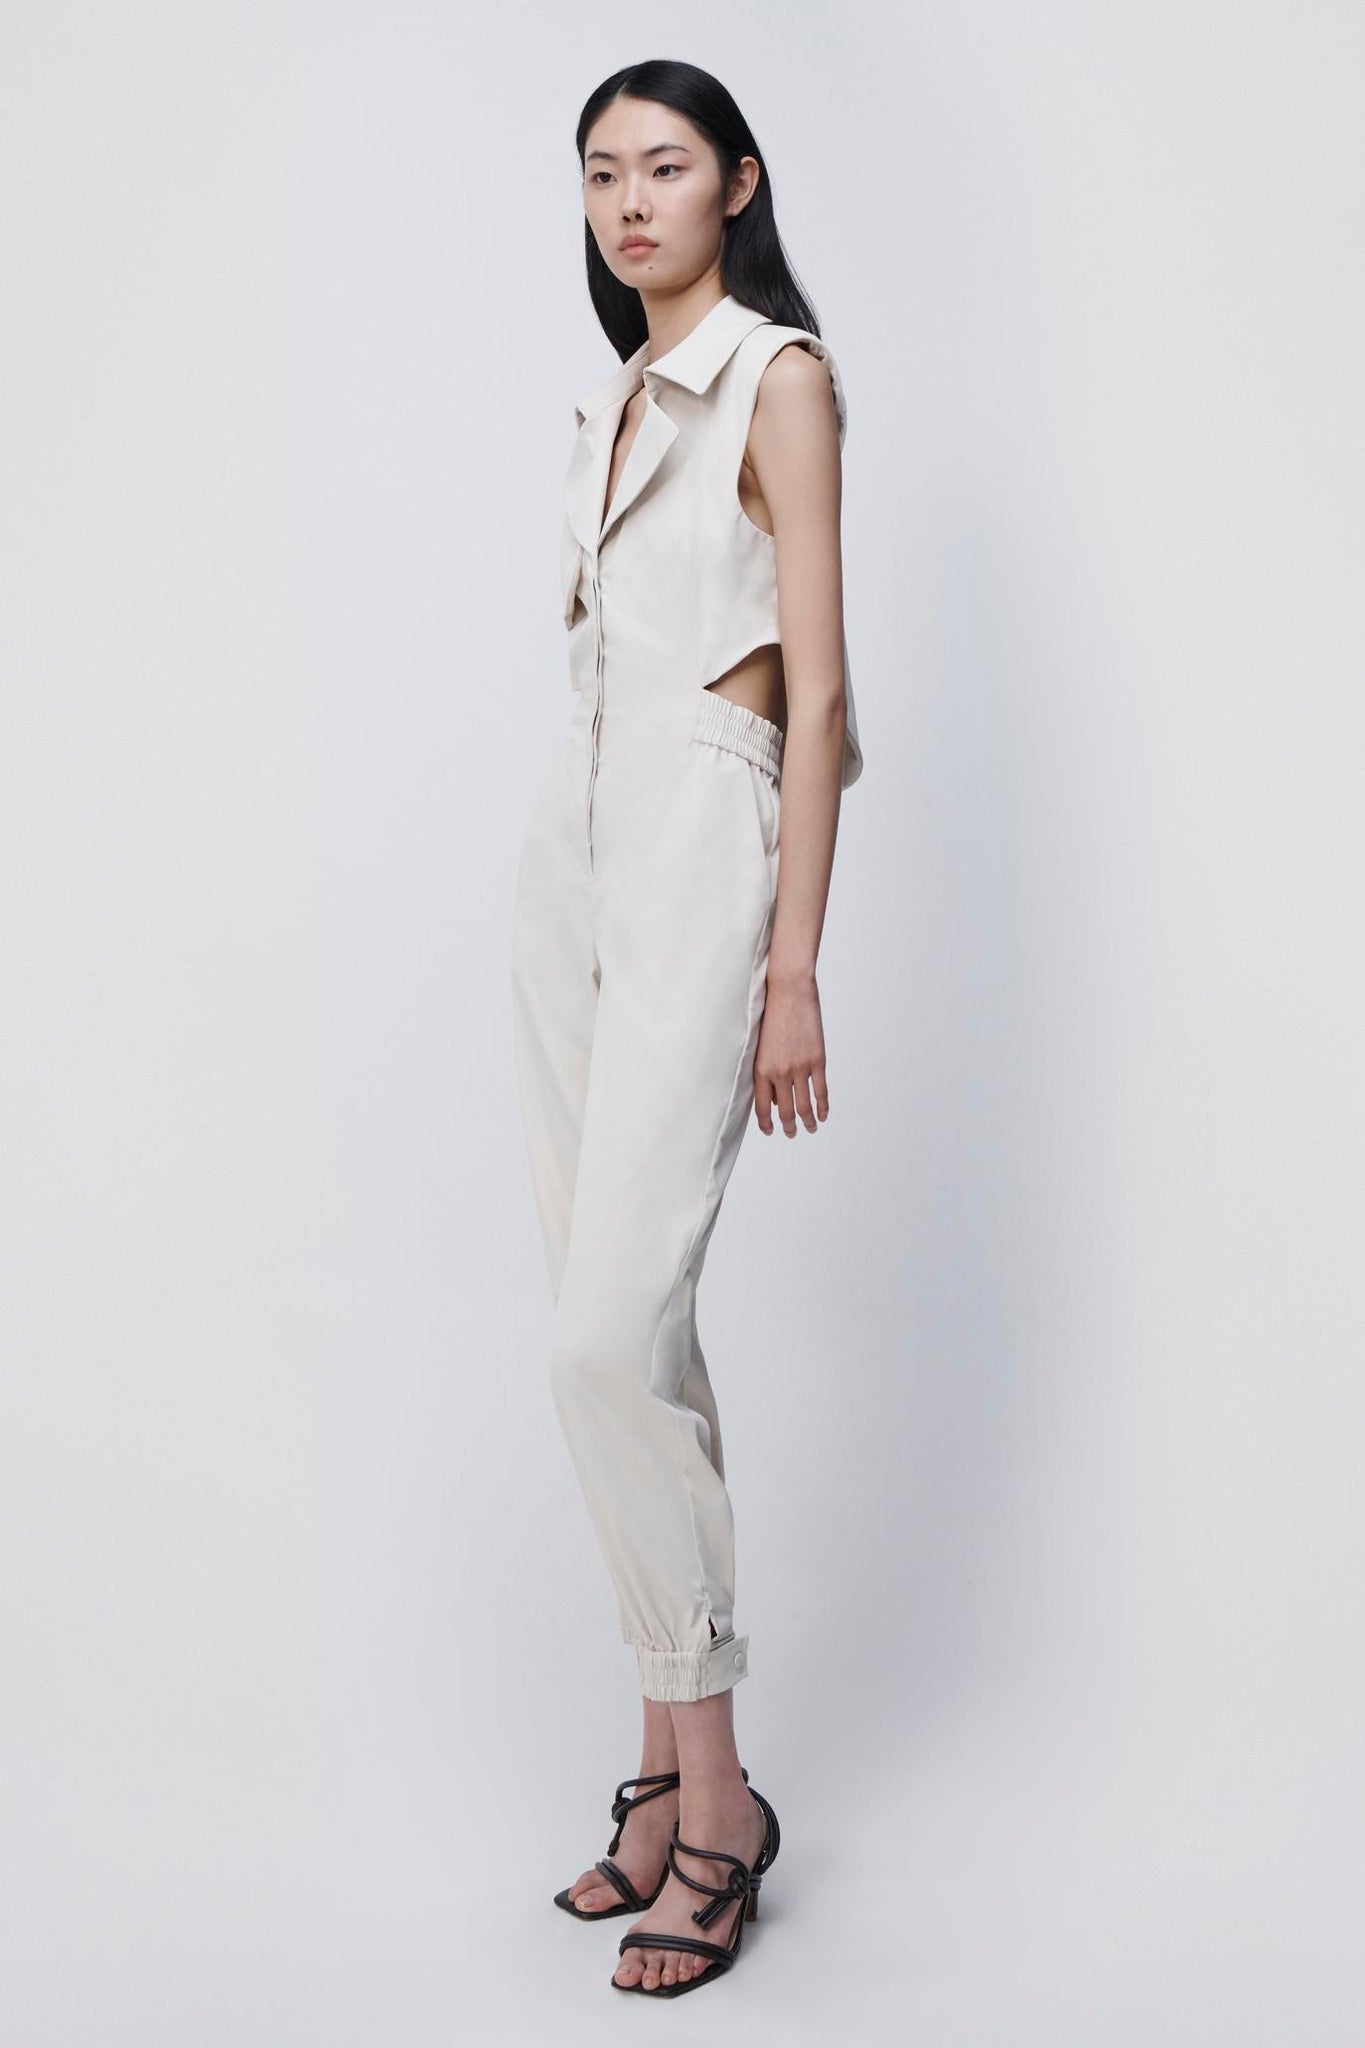 Rayley Trench Jumpsuit - SIMKHAI 